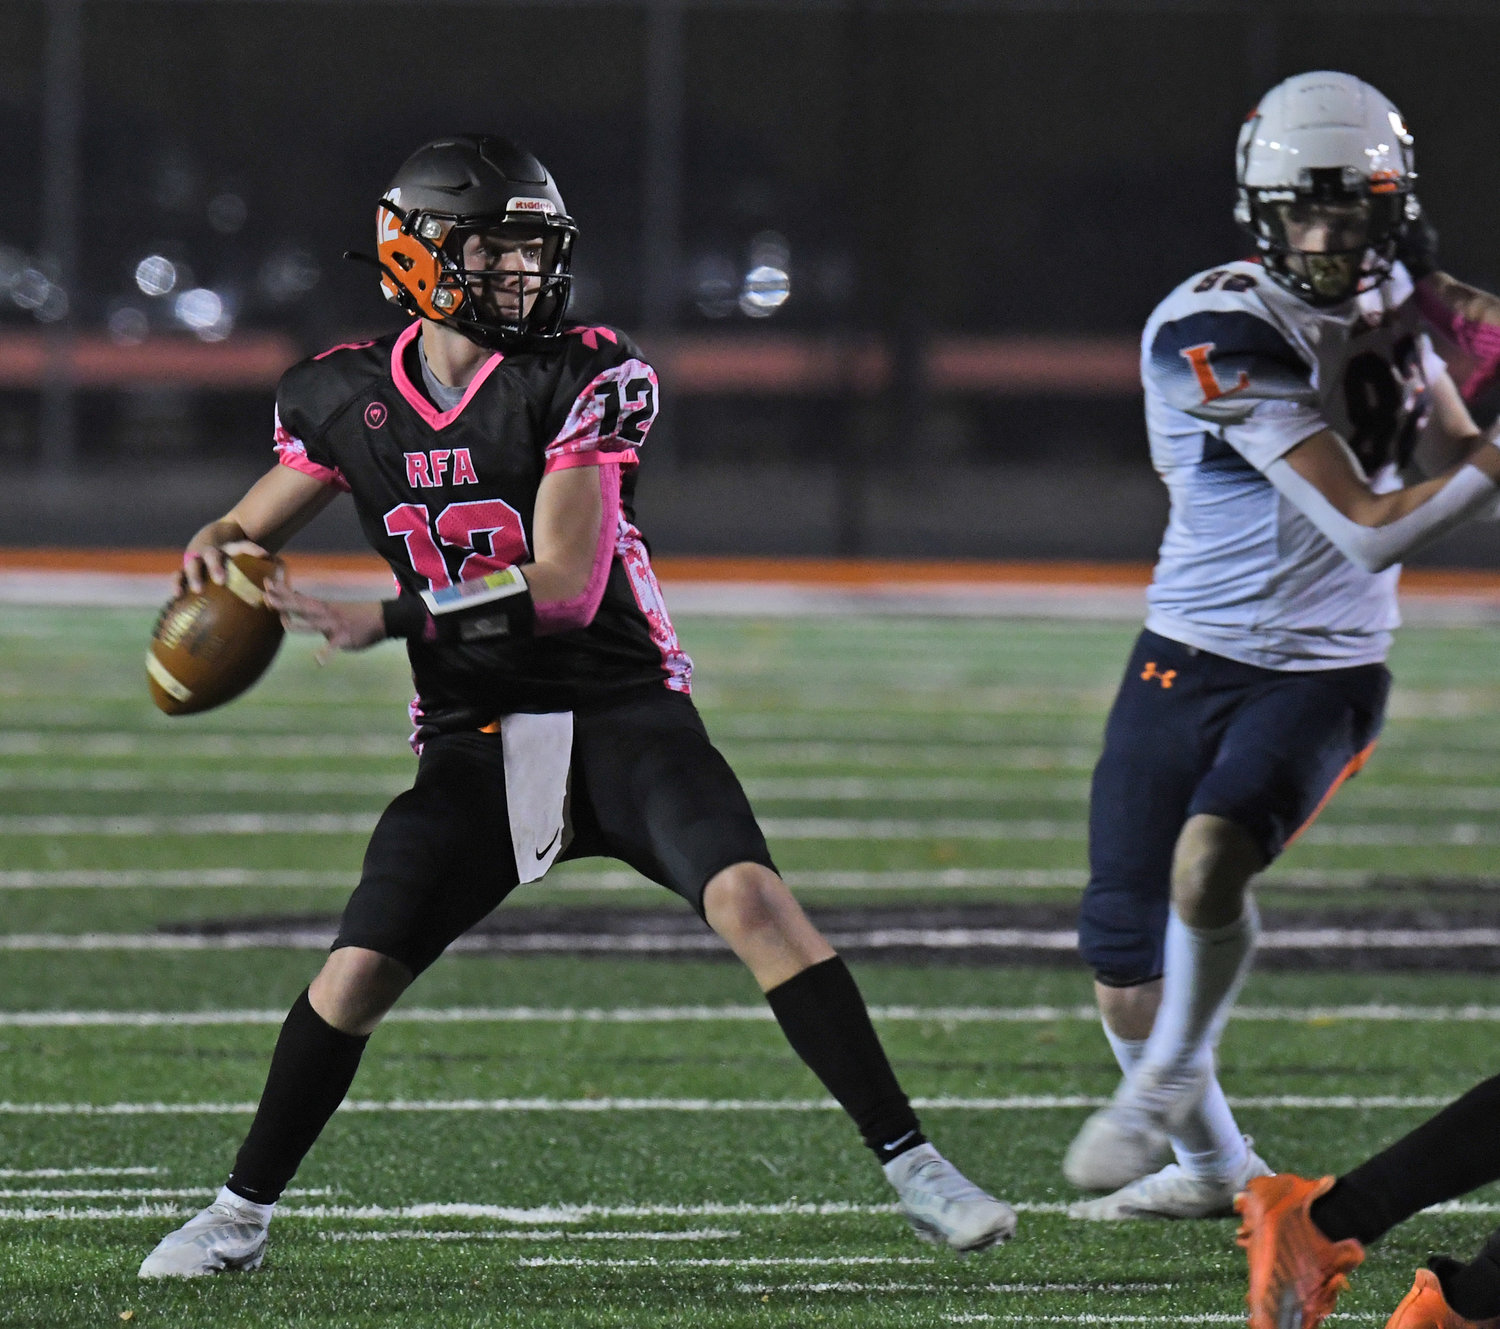 RFA junior Evan Carlson-Stephenson winds up for a touchdown pass in the first half against Liverpool on Friday night at RFA Stadium. He had 186 yards passing.